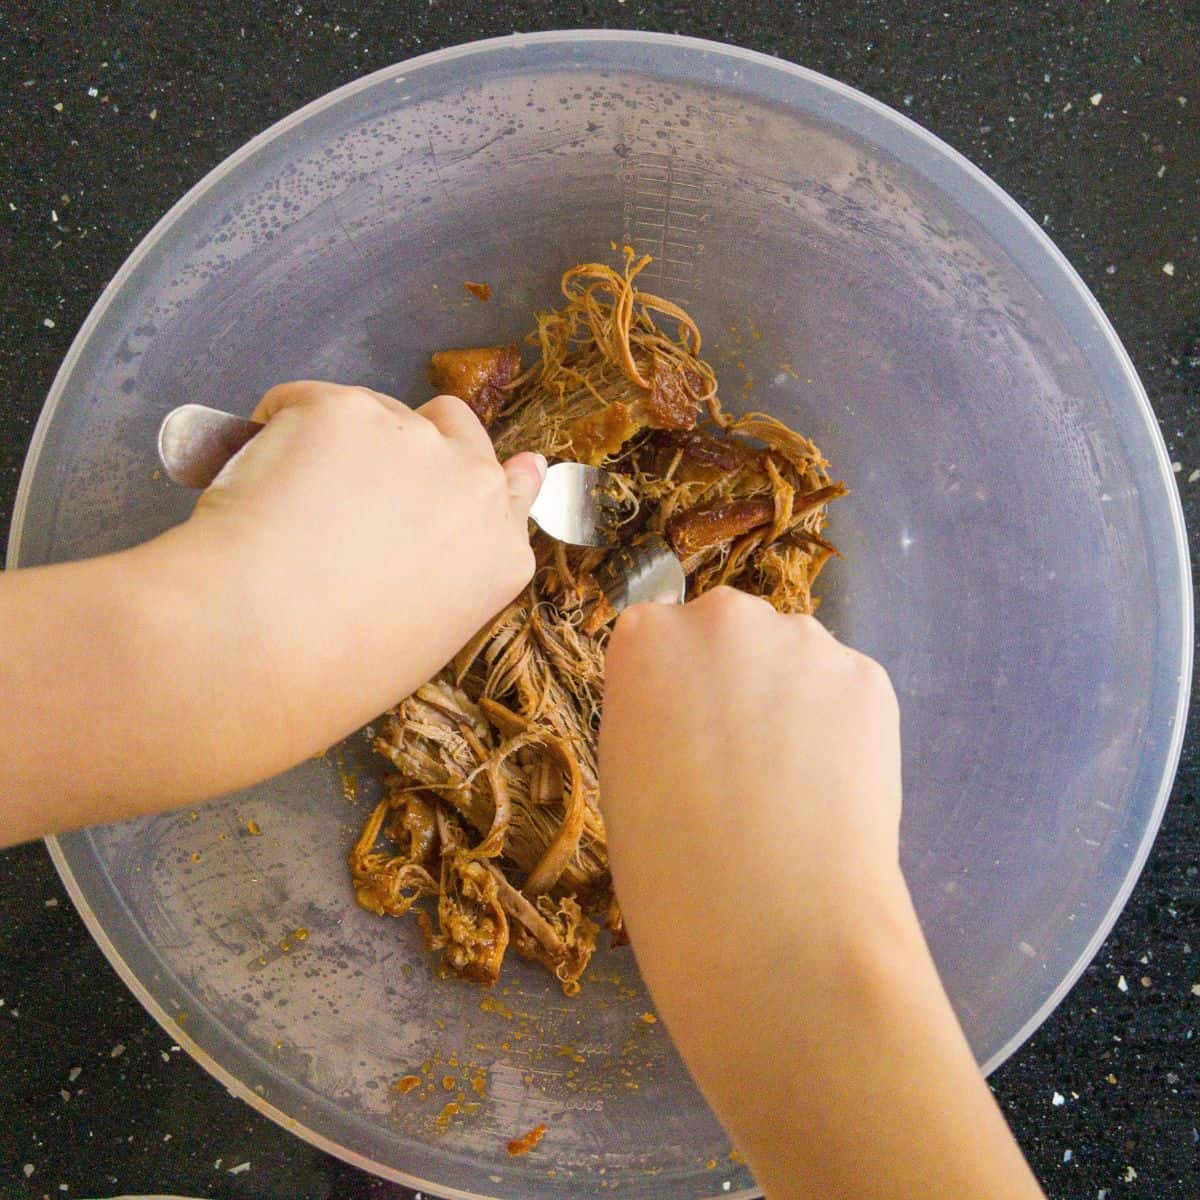 Beef being shredded in a mixing bowl with two forks.